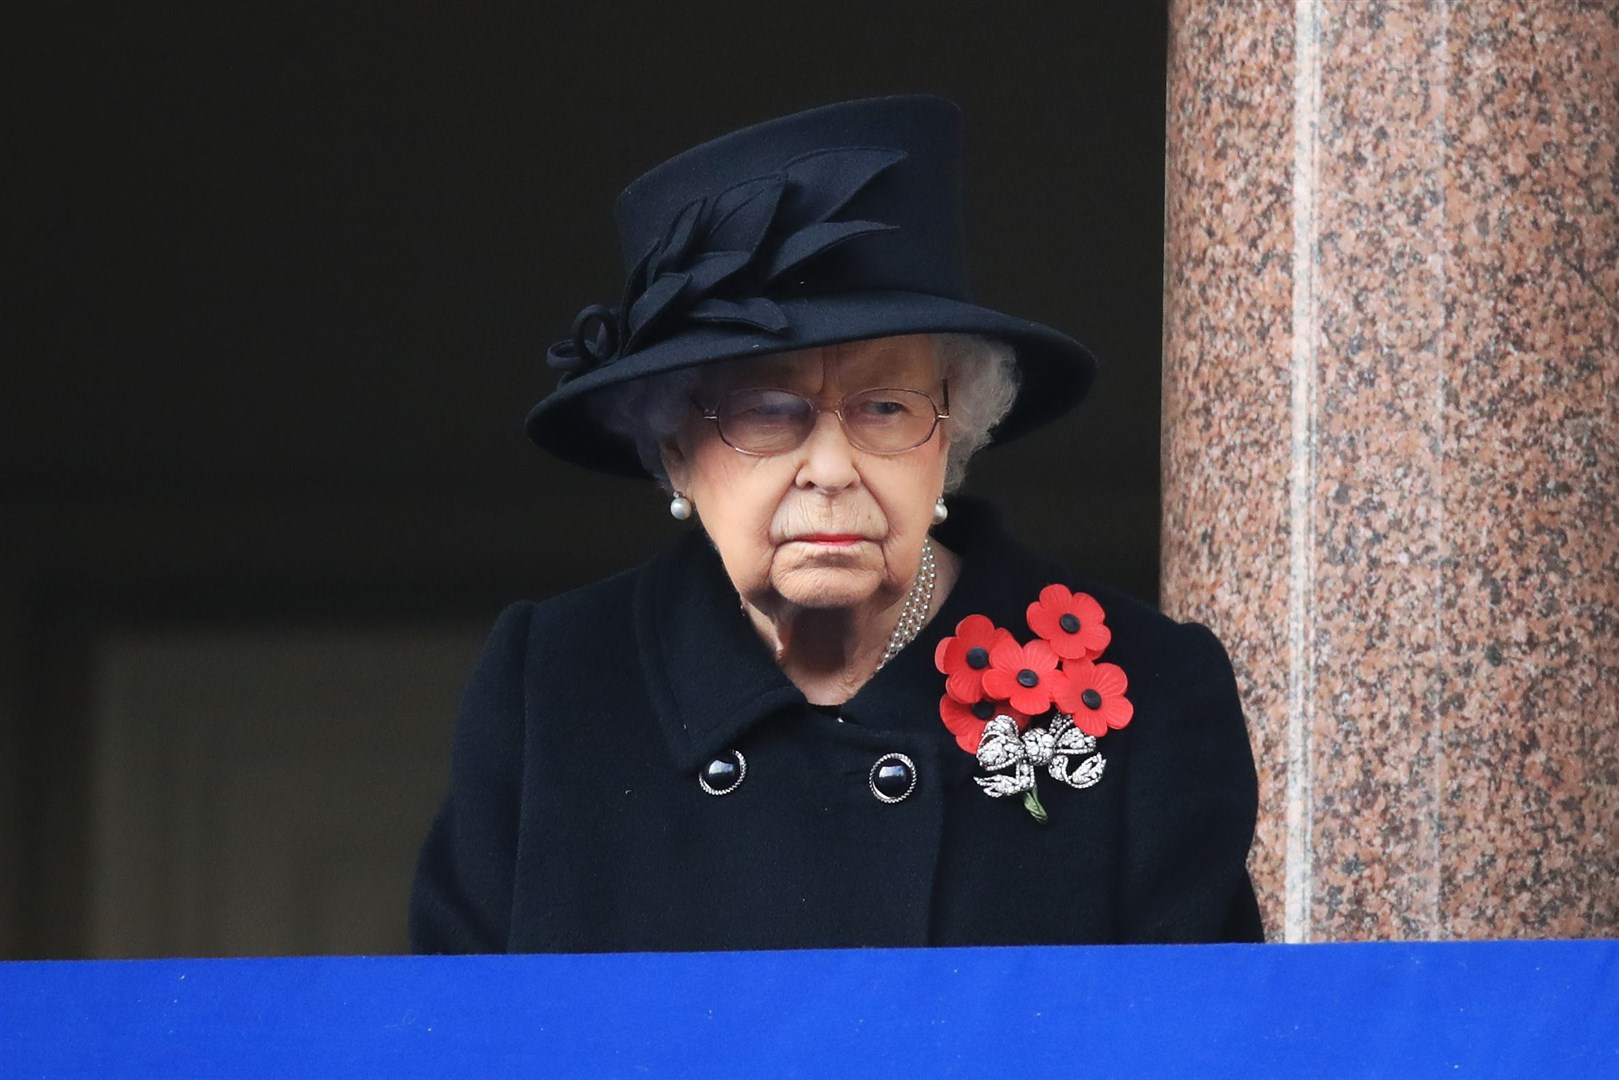 The Queen during the Remembrance Sunday service at the Cenotaph in Whitehall (Aaron Chown/PA)